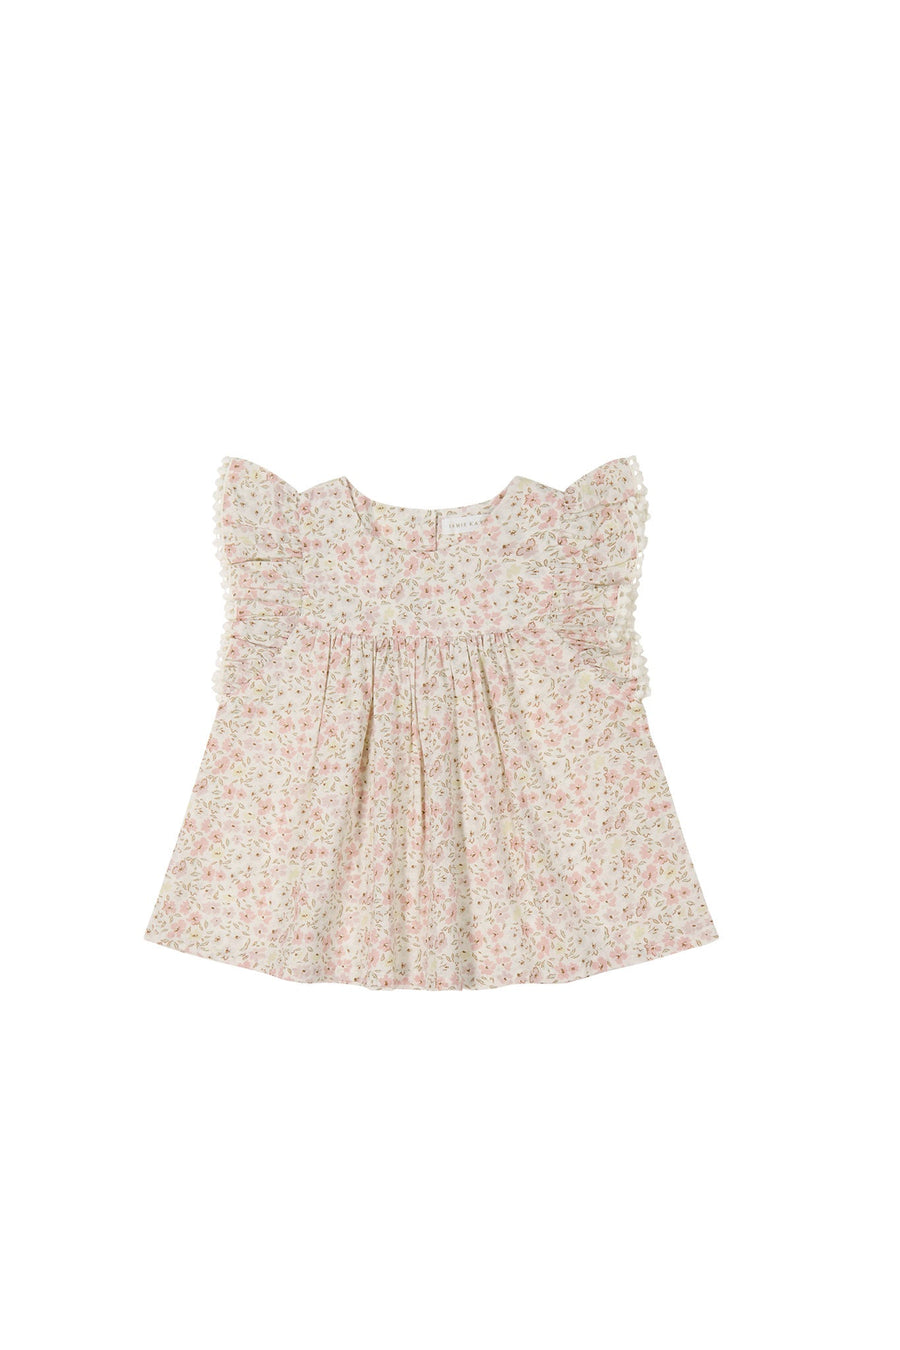 Organic Cotton Eleanor Top - Fifi Floral Childrens Top from Jamie Kay USA